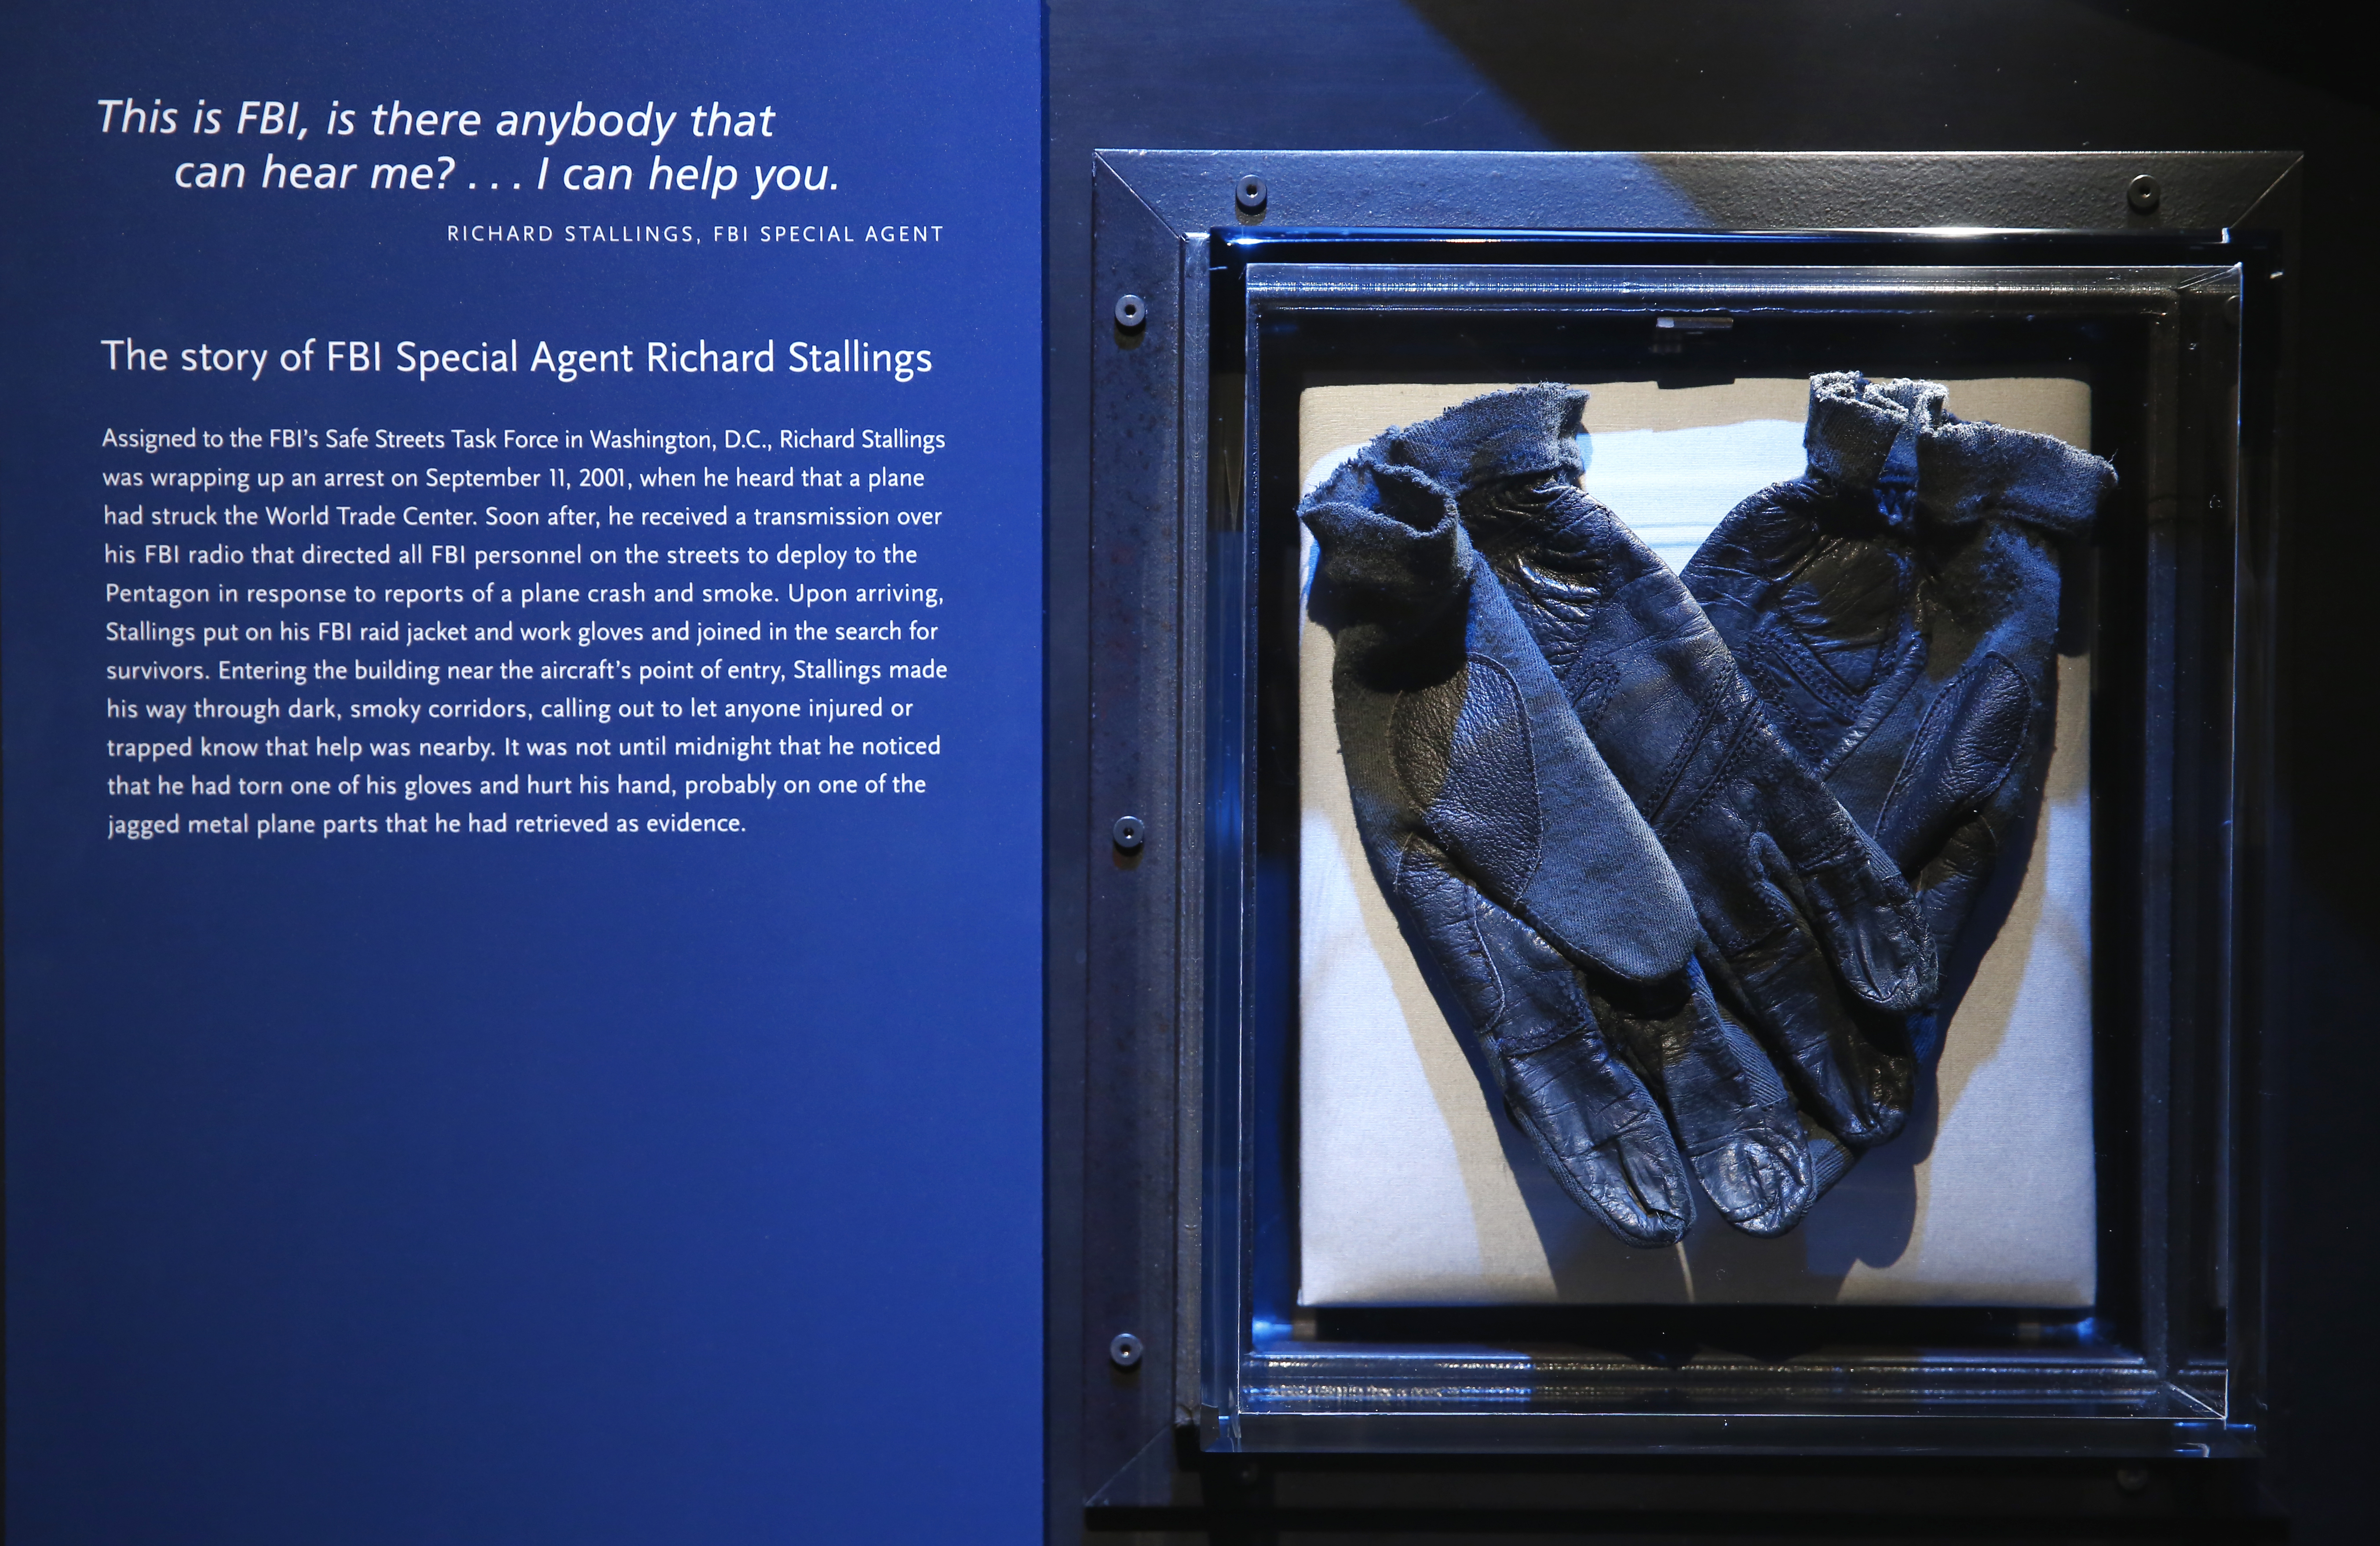 The black leather gloves worn by FBI agent Richard Stallings are displayed in the Museum with informational text.